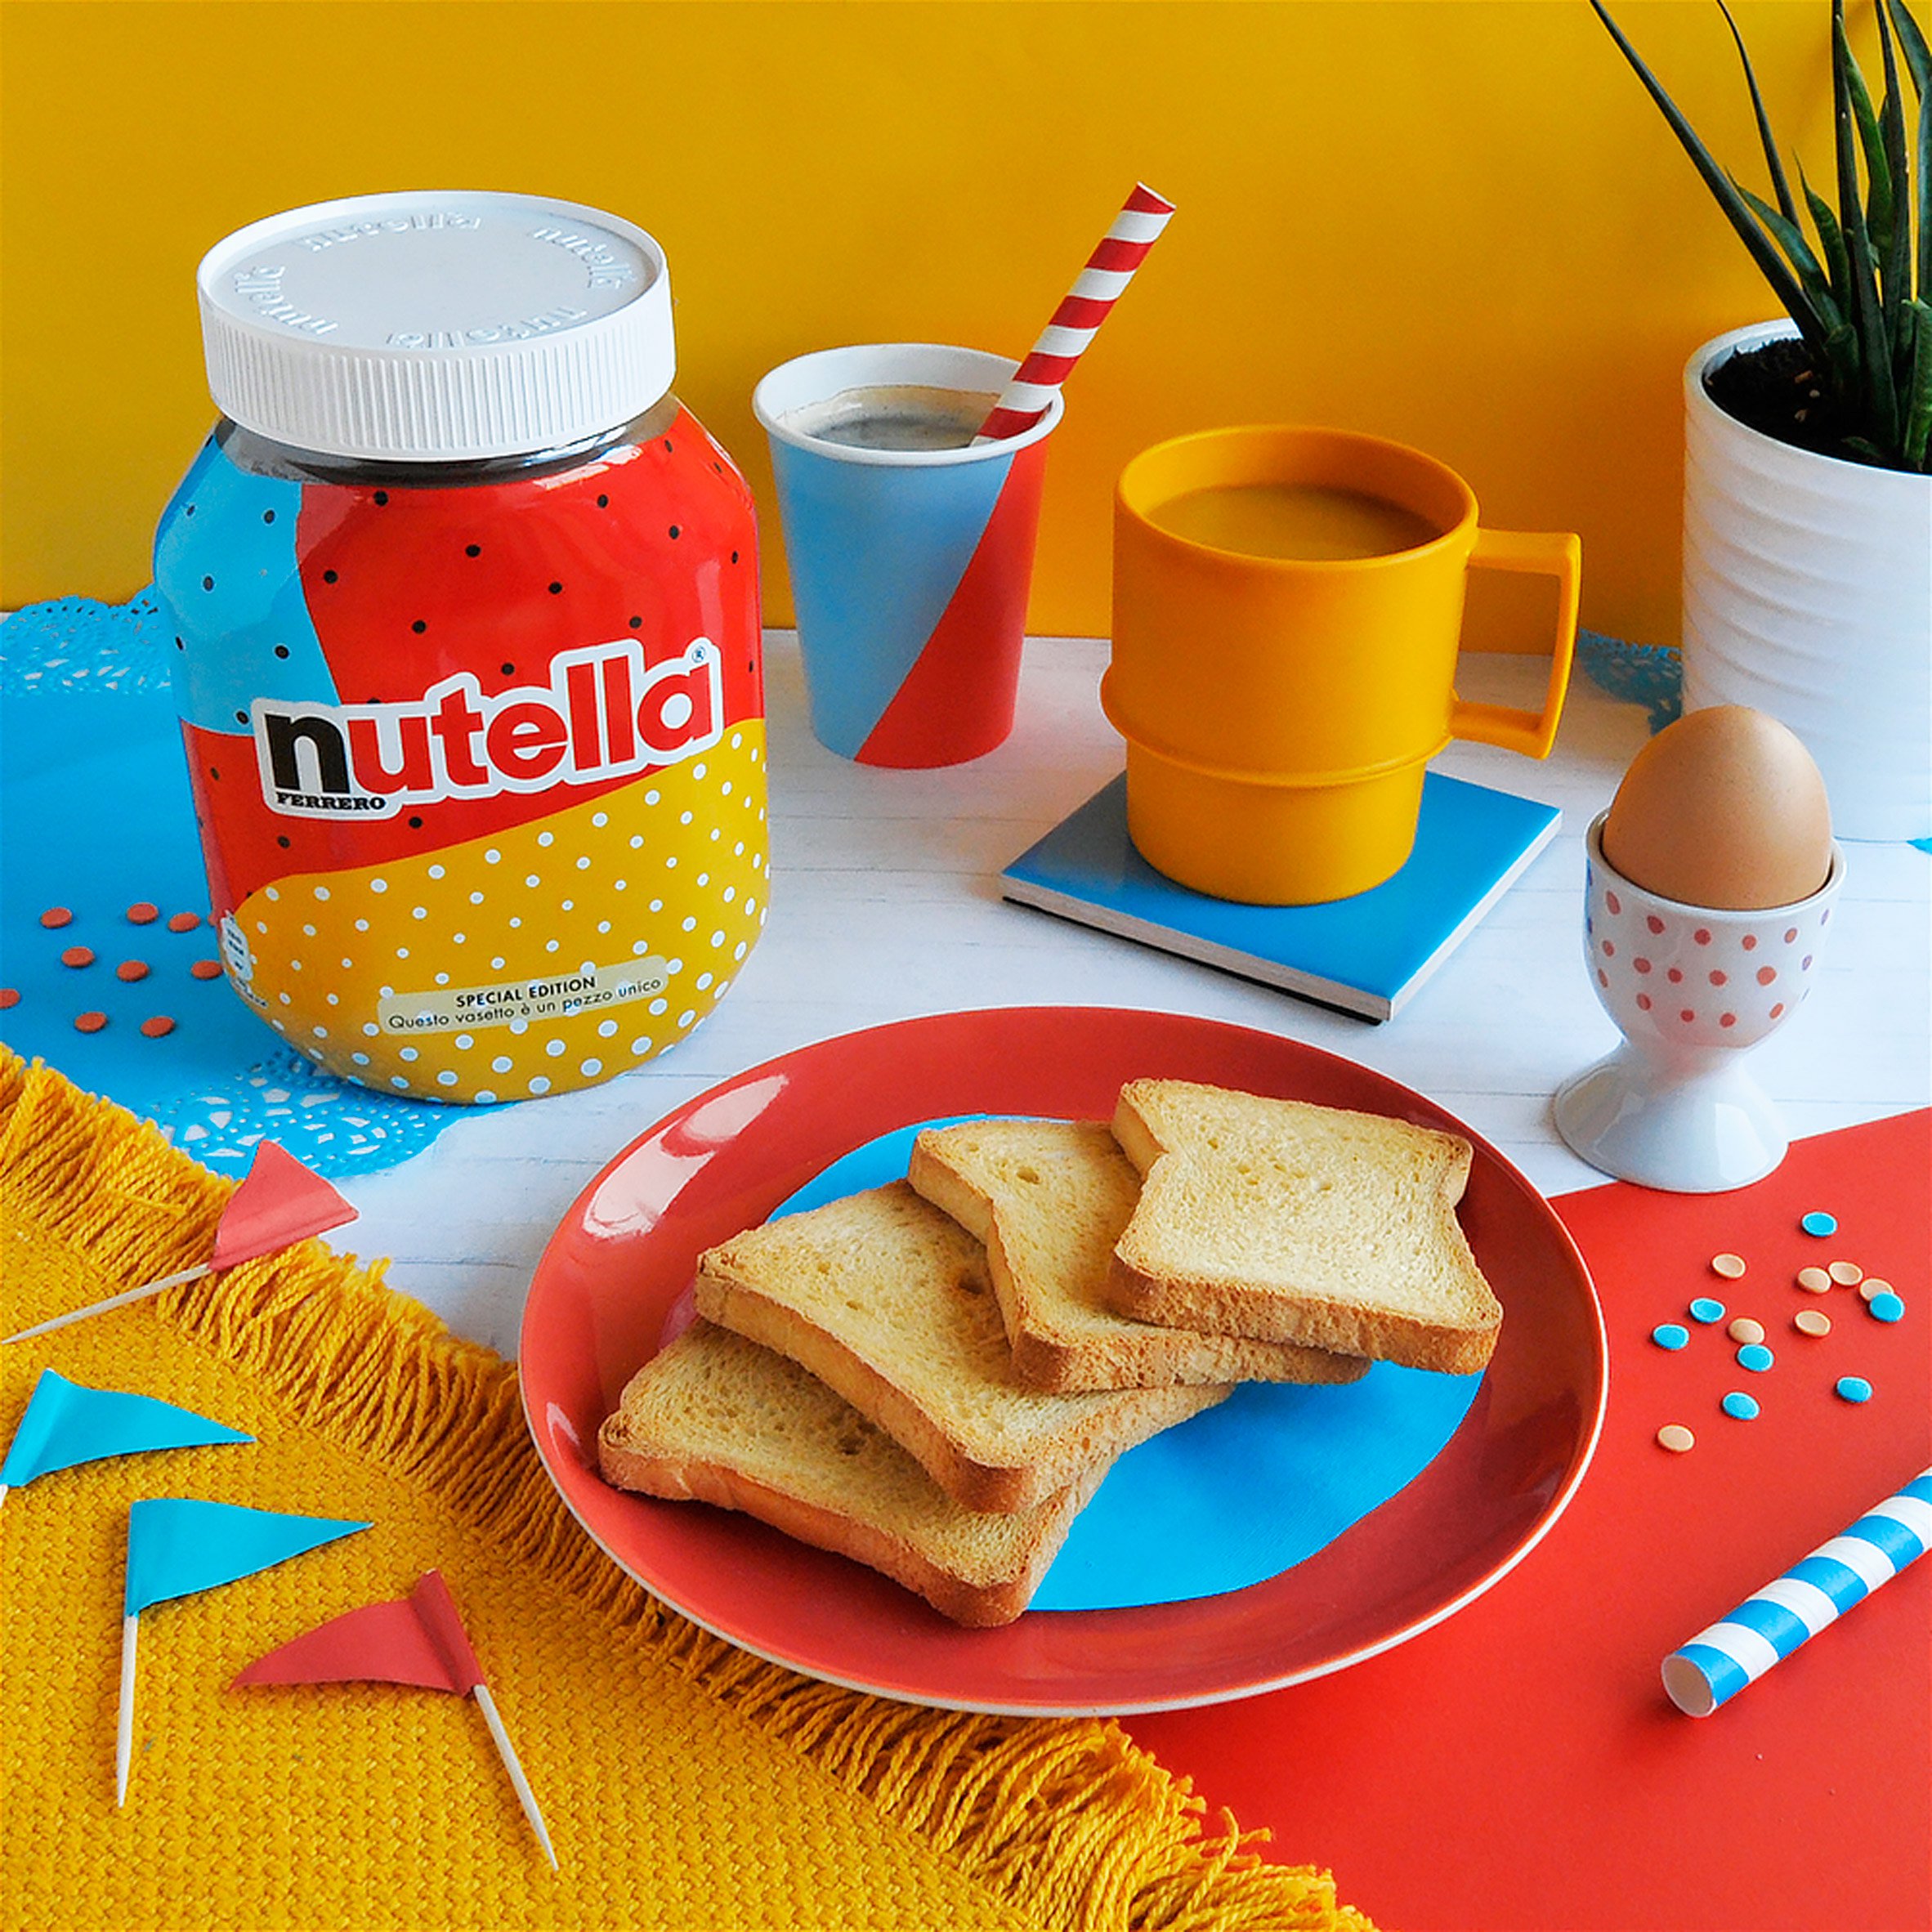 nutella-unica-packaging-design-products-_dezeen_2364_col_0.jpg